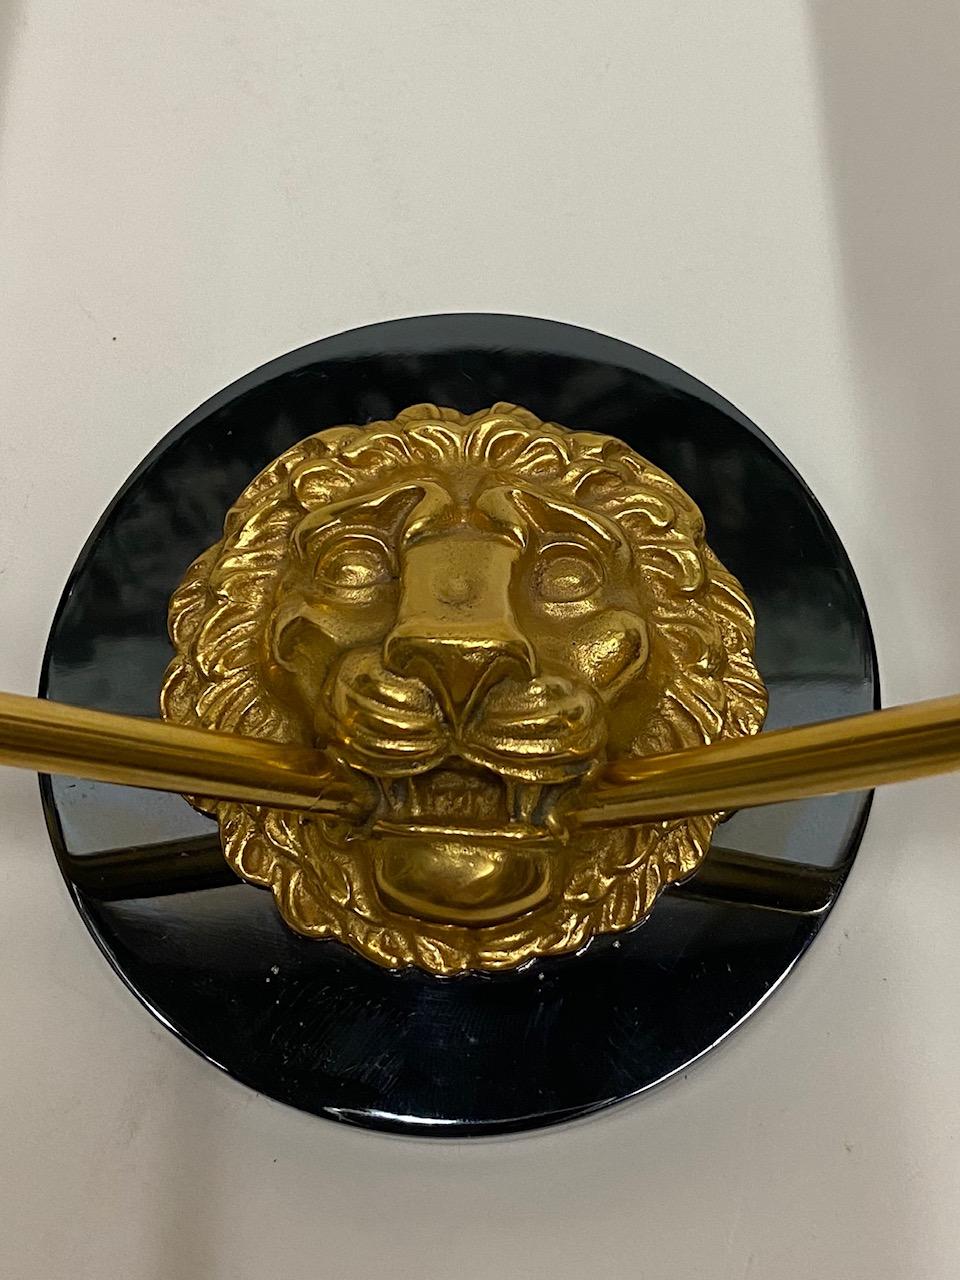 Pair of supremely elegant French neoclassical style wall sconces having central gilt bronze lion medallion set against nickel plated discs, with arrow decoration and two arms in each. Gorgeous casting and newly rewired.